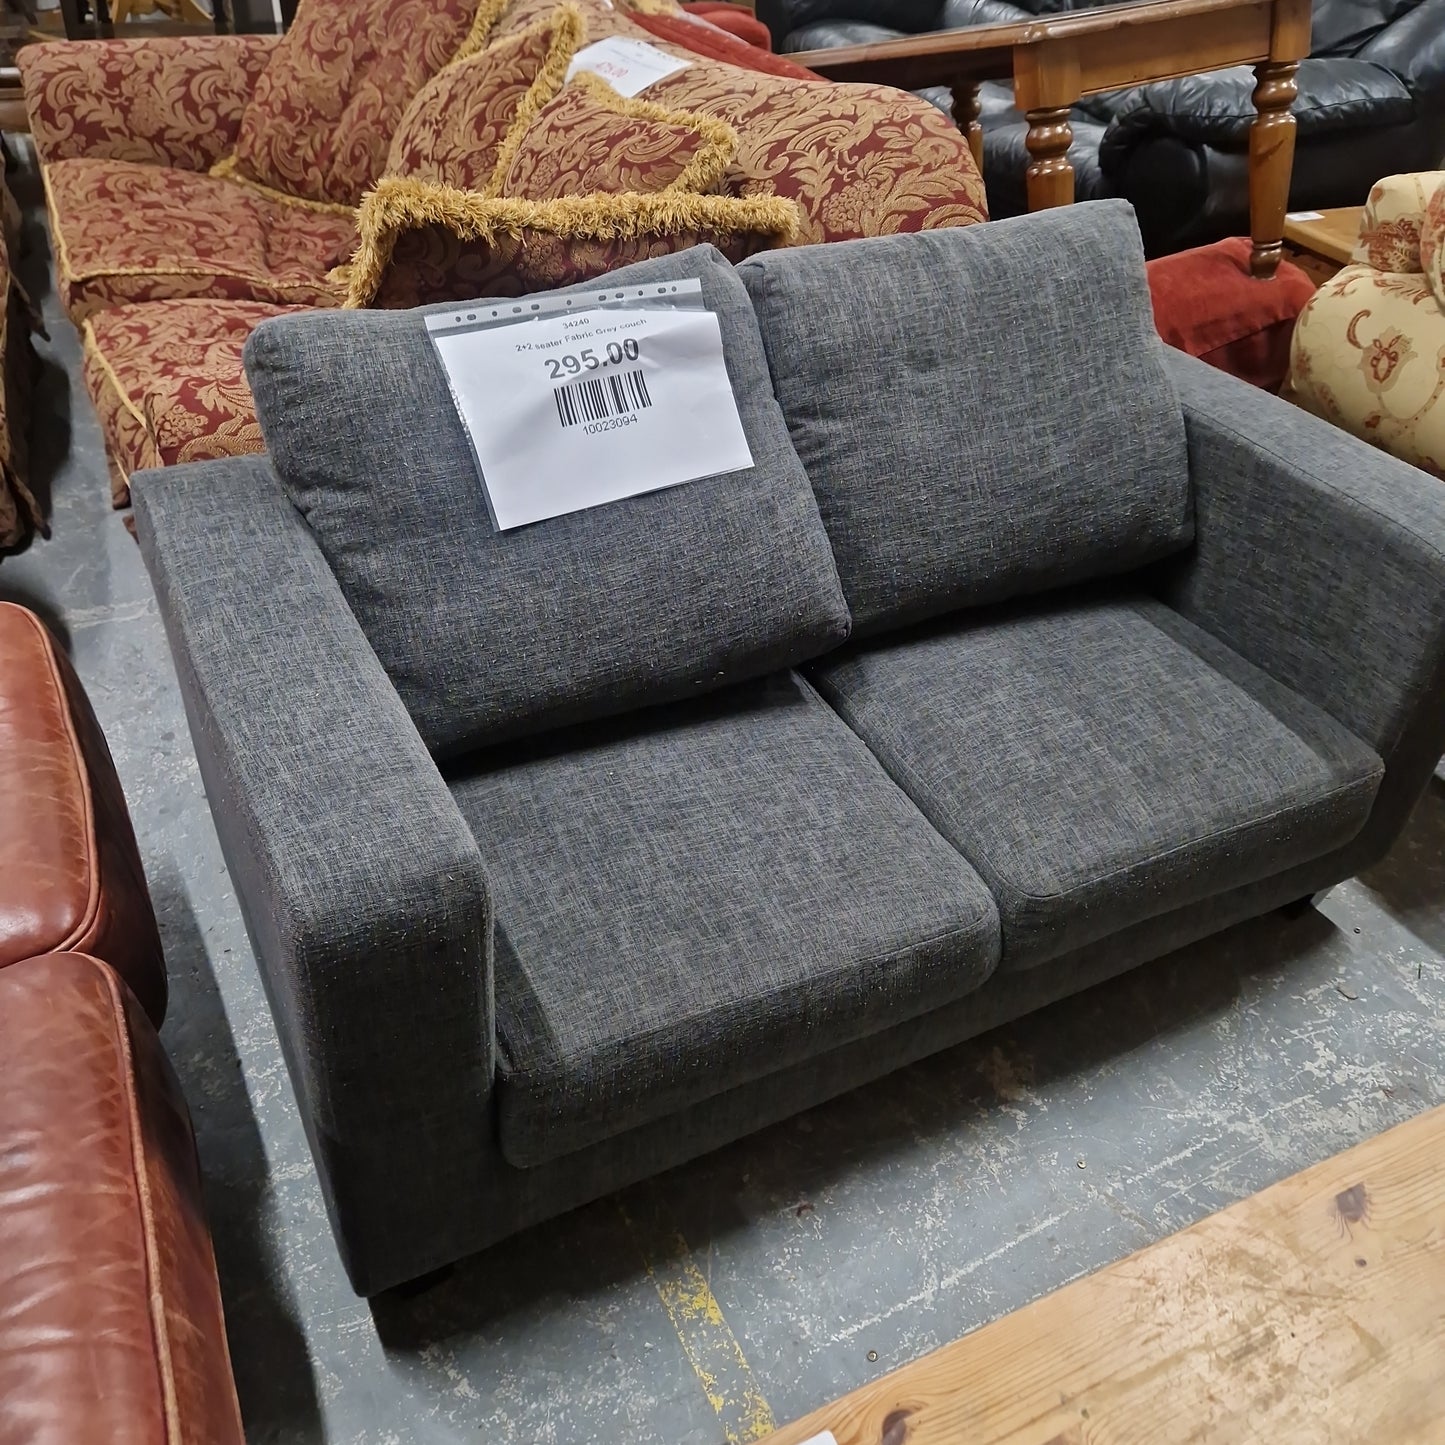 2+2 seater Fabric Grey couch
145.00 per couch